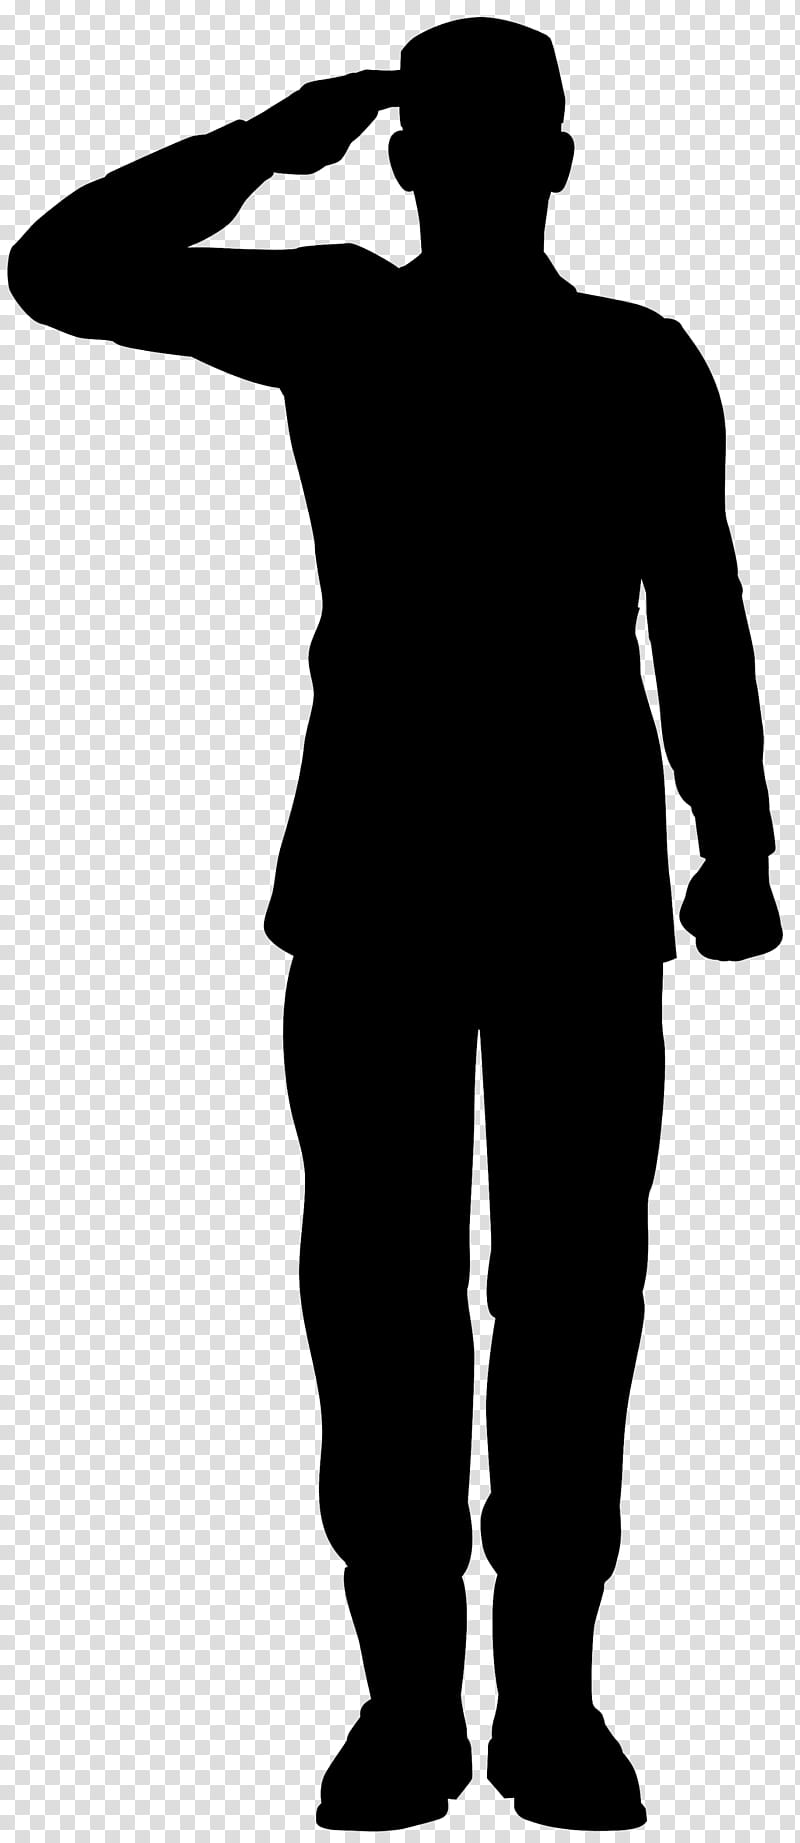 Soldier Silhouette, Army, SALUTE, Military, Standing, Black, Male, Sleeve transparent background PNG clipart